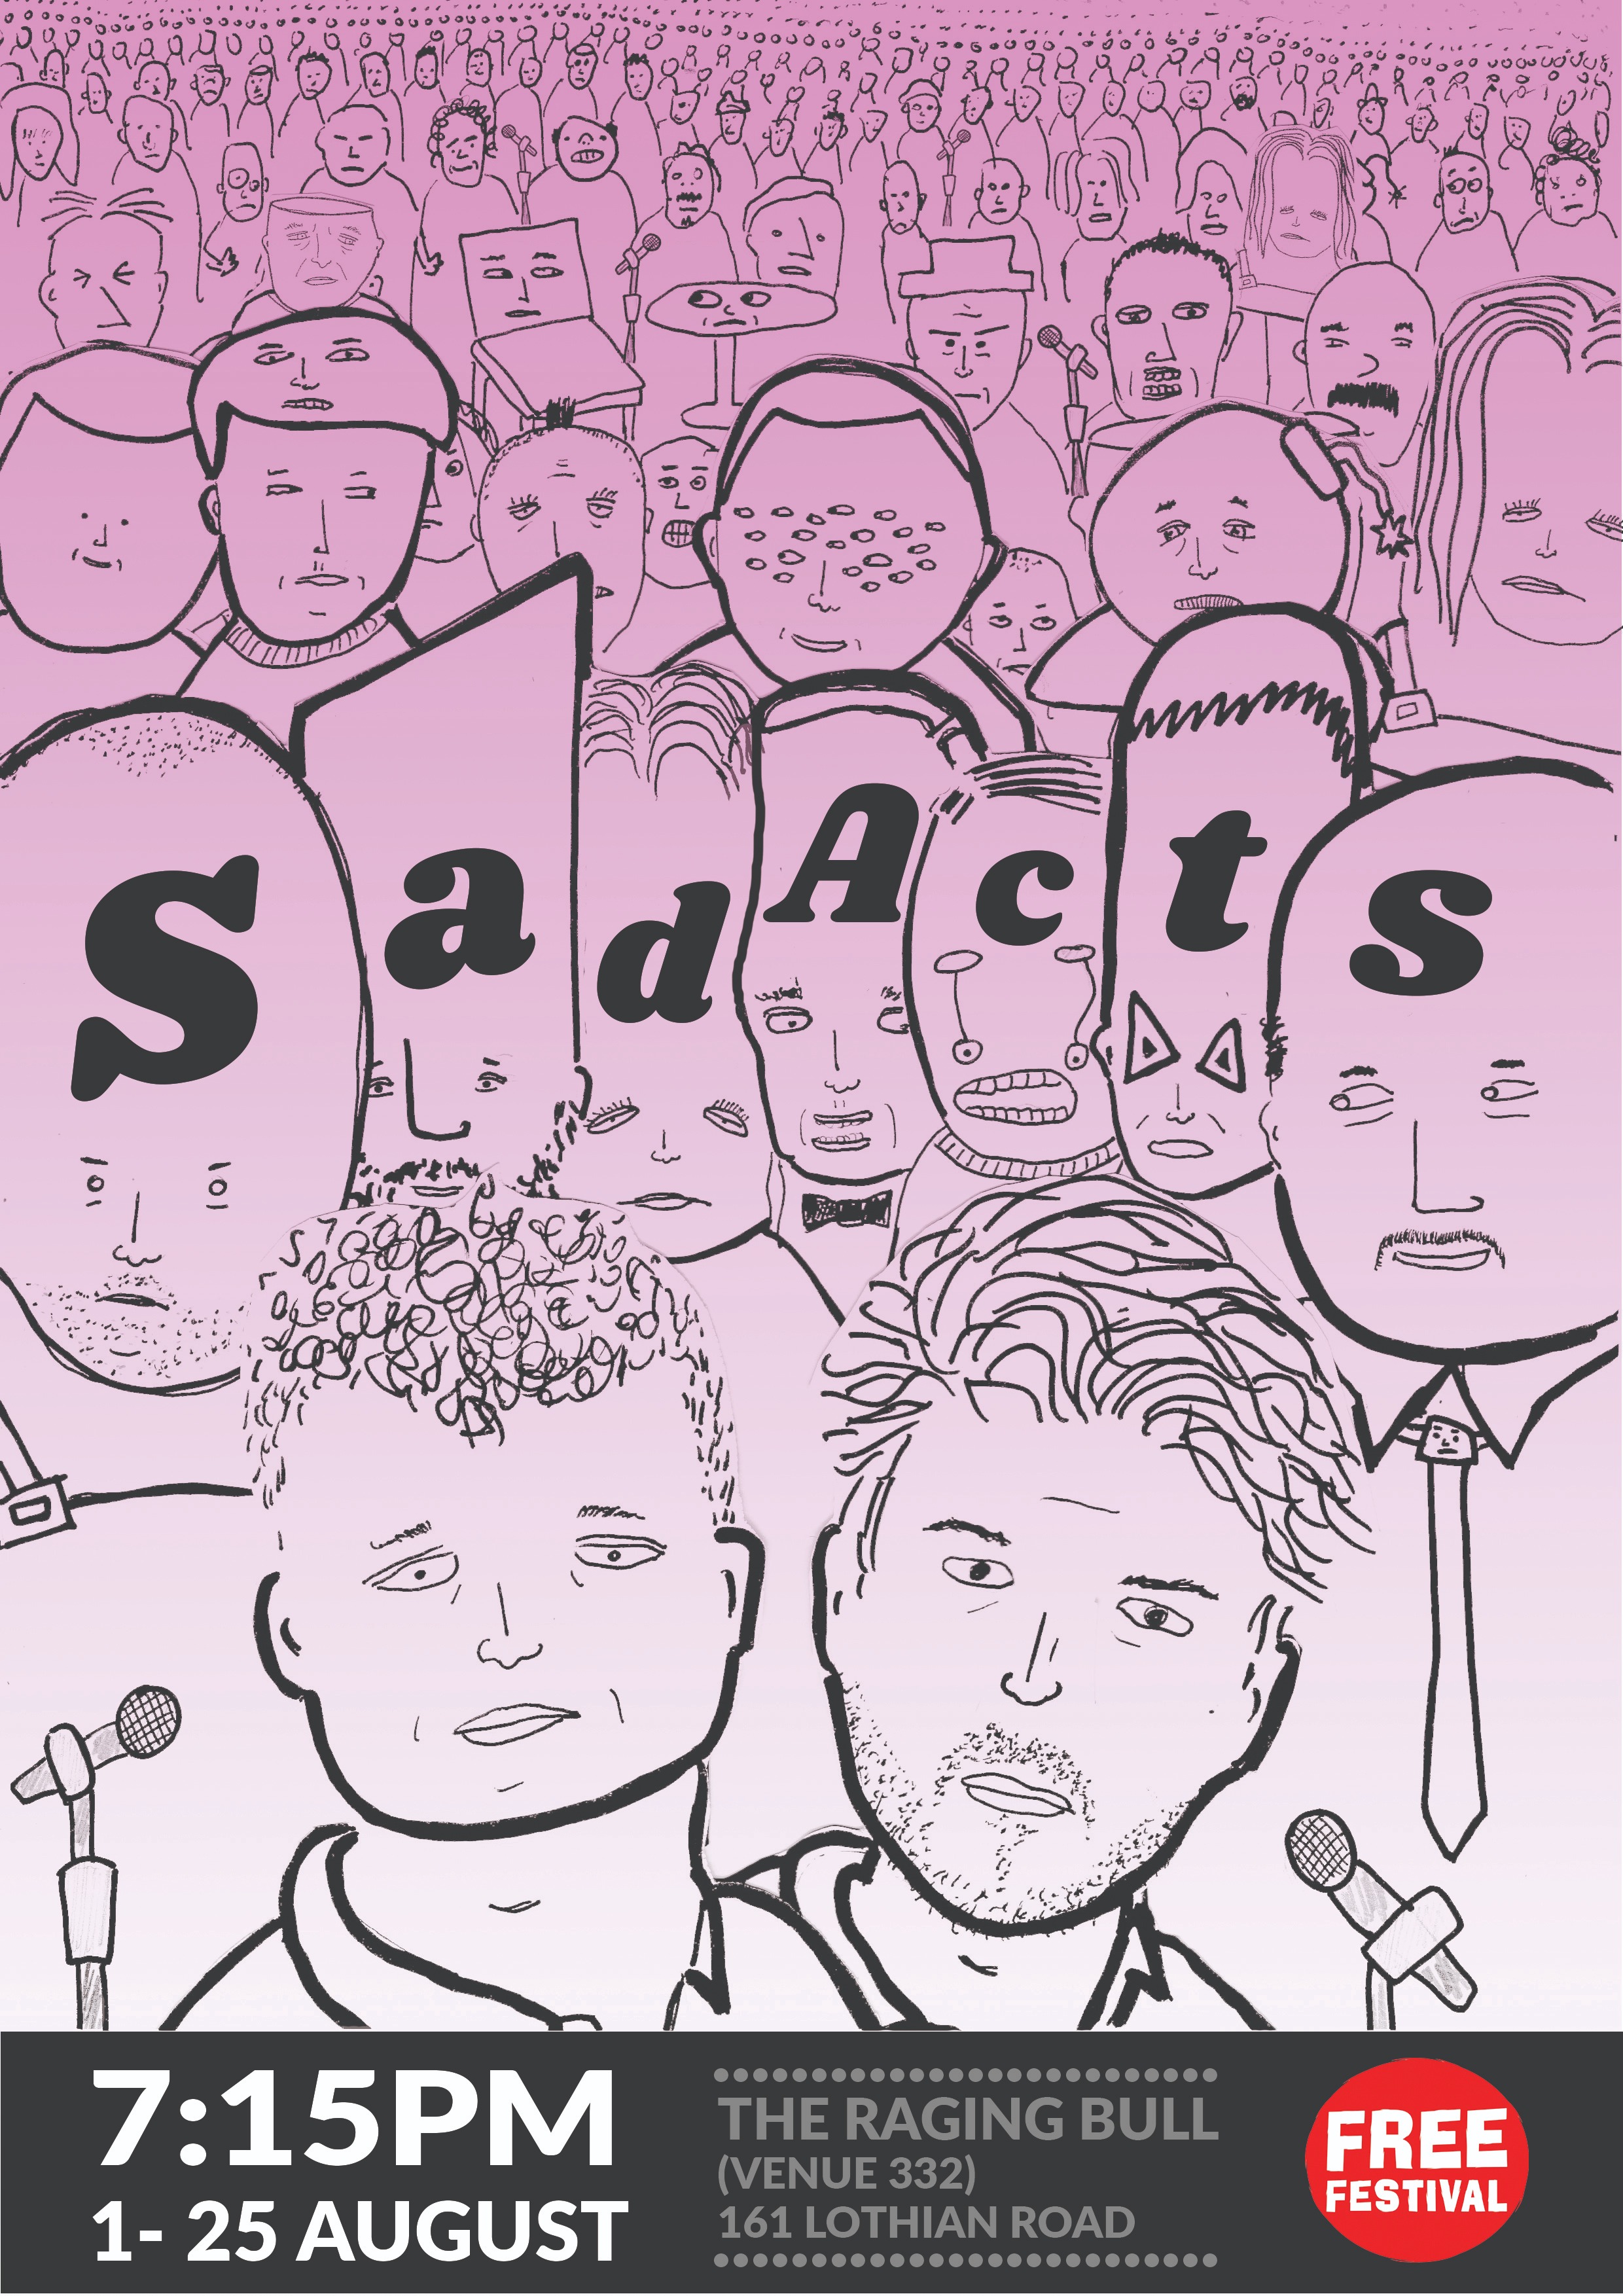 The poster for Sad Acts